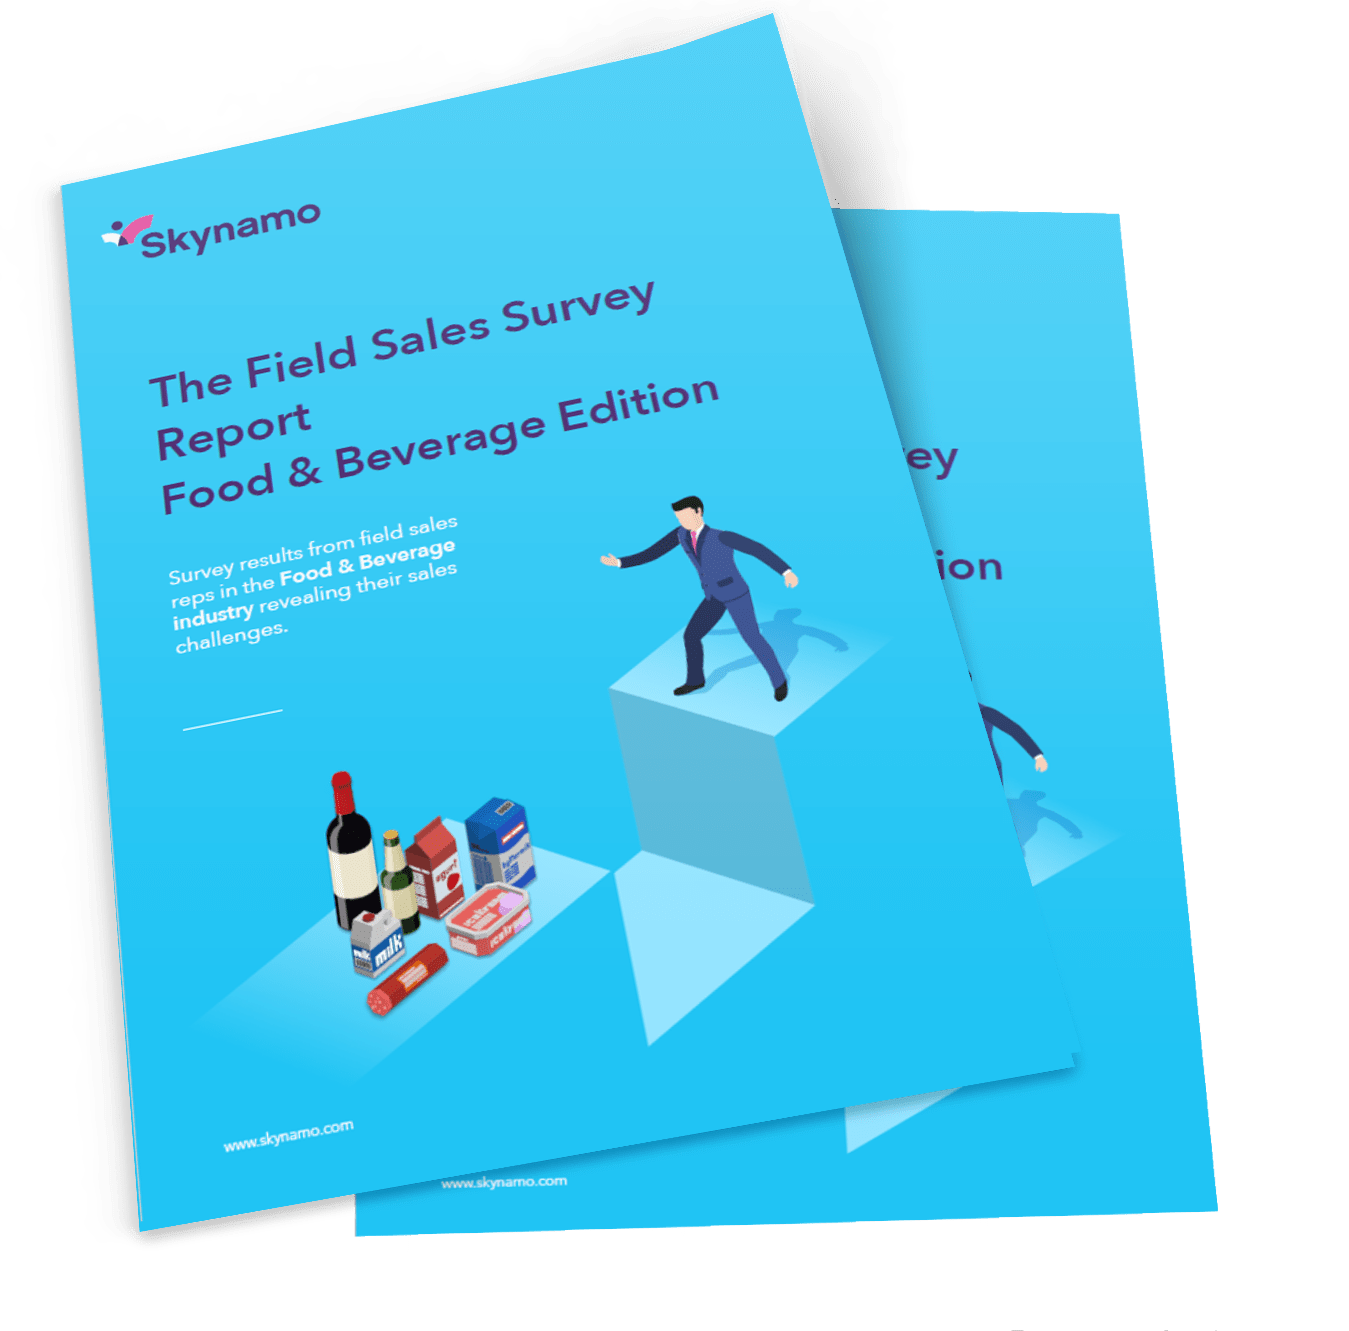 The Field Sales Survey Report_Food & Beverage Edition